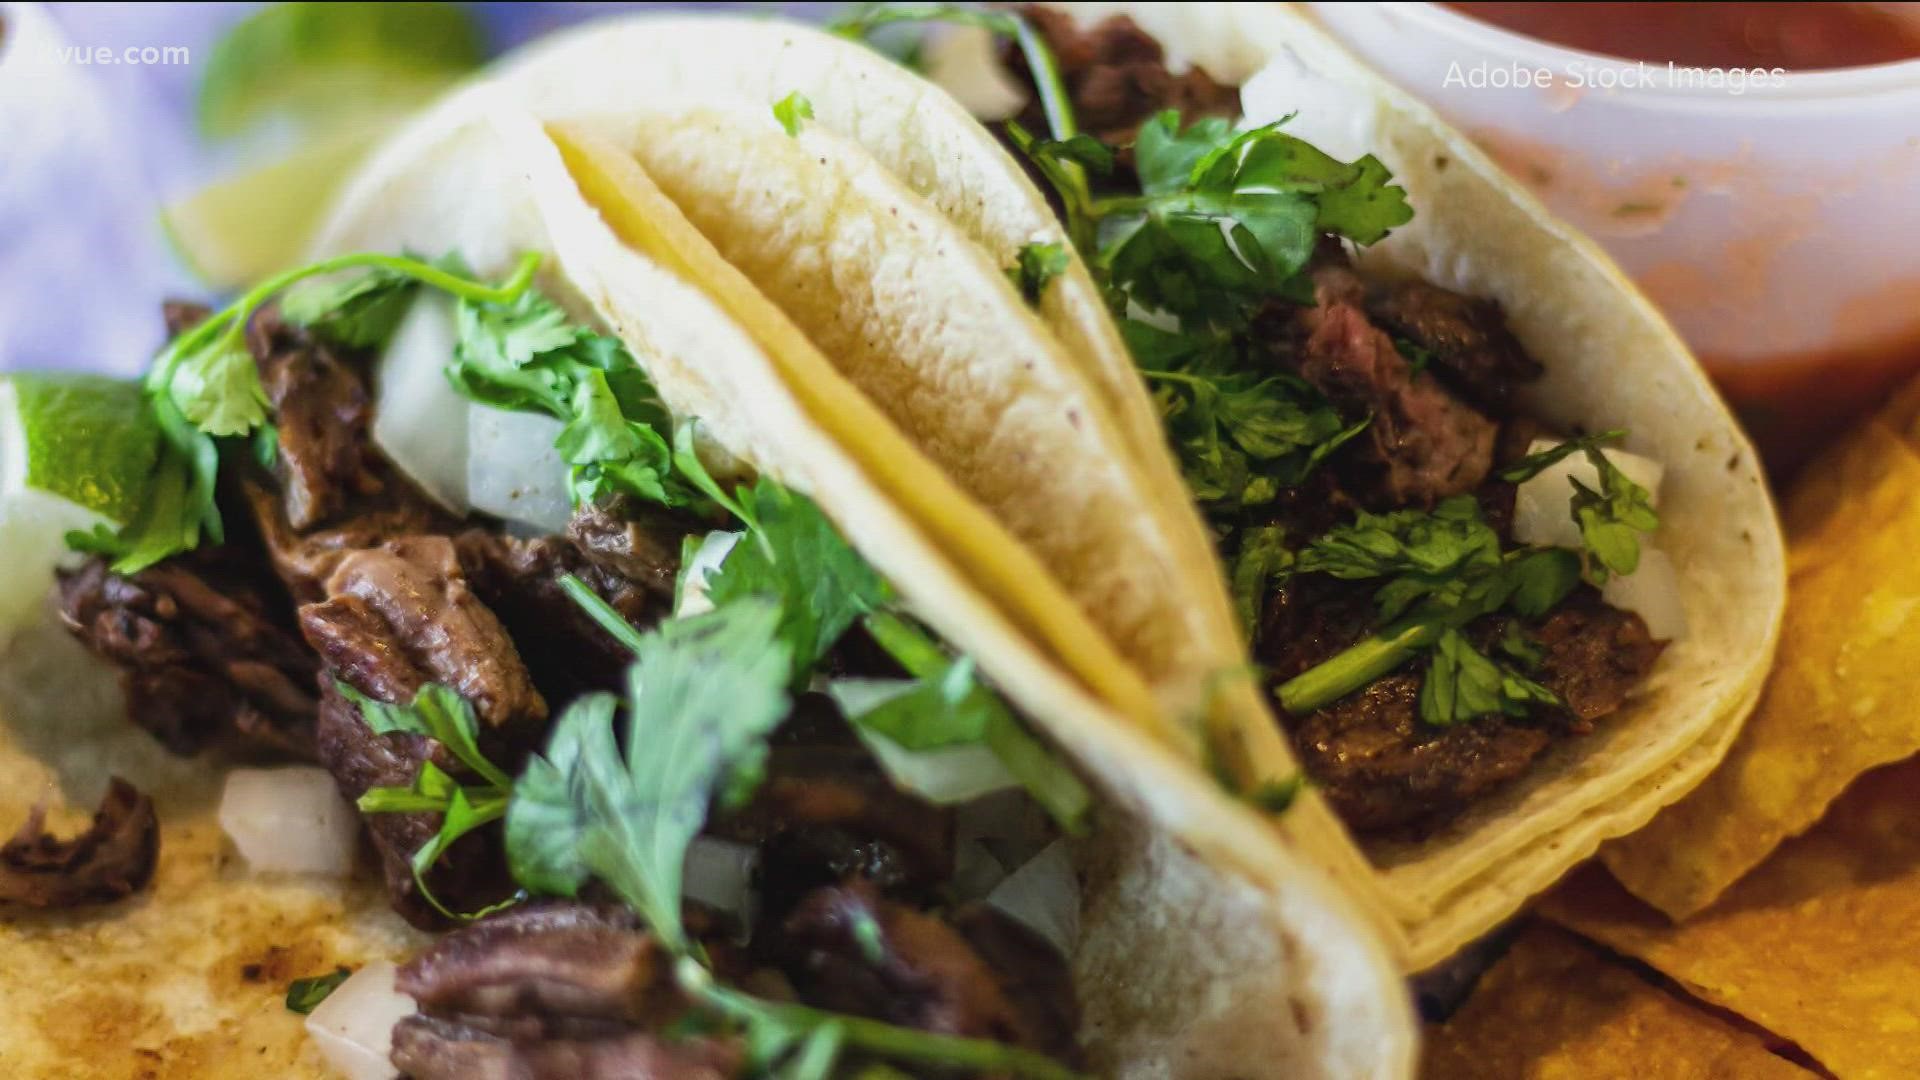 Who has the best tacos in Texas: Austin or San Antonio? Actor Pedro Pascal weighed in on the old debate.